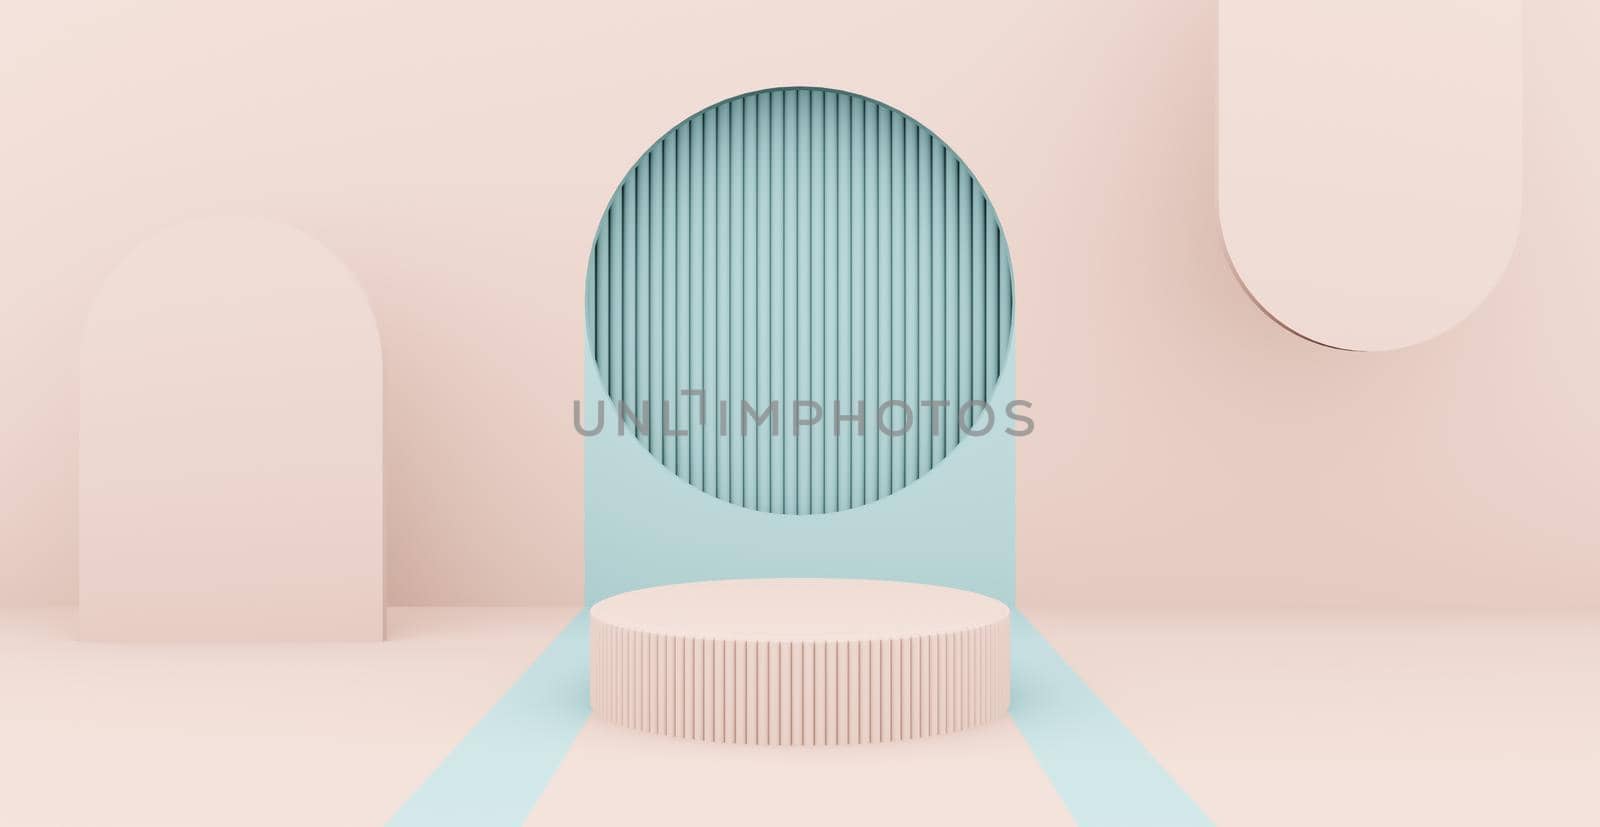 3d rendering background with abstract podium and wall scene background. Composition for product presentation, brand, product advertising.